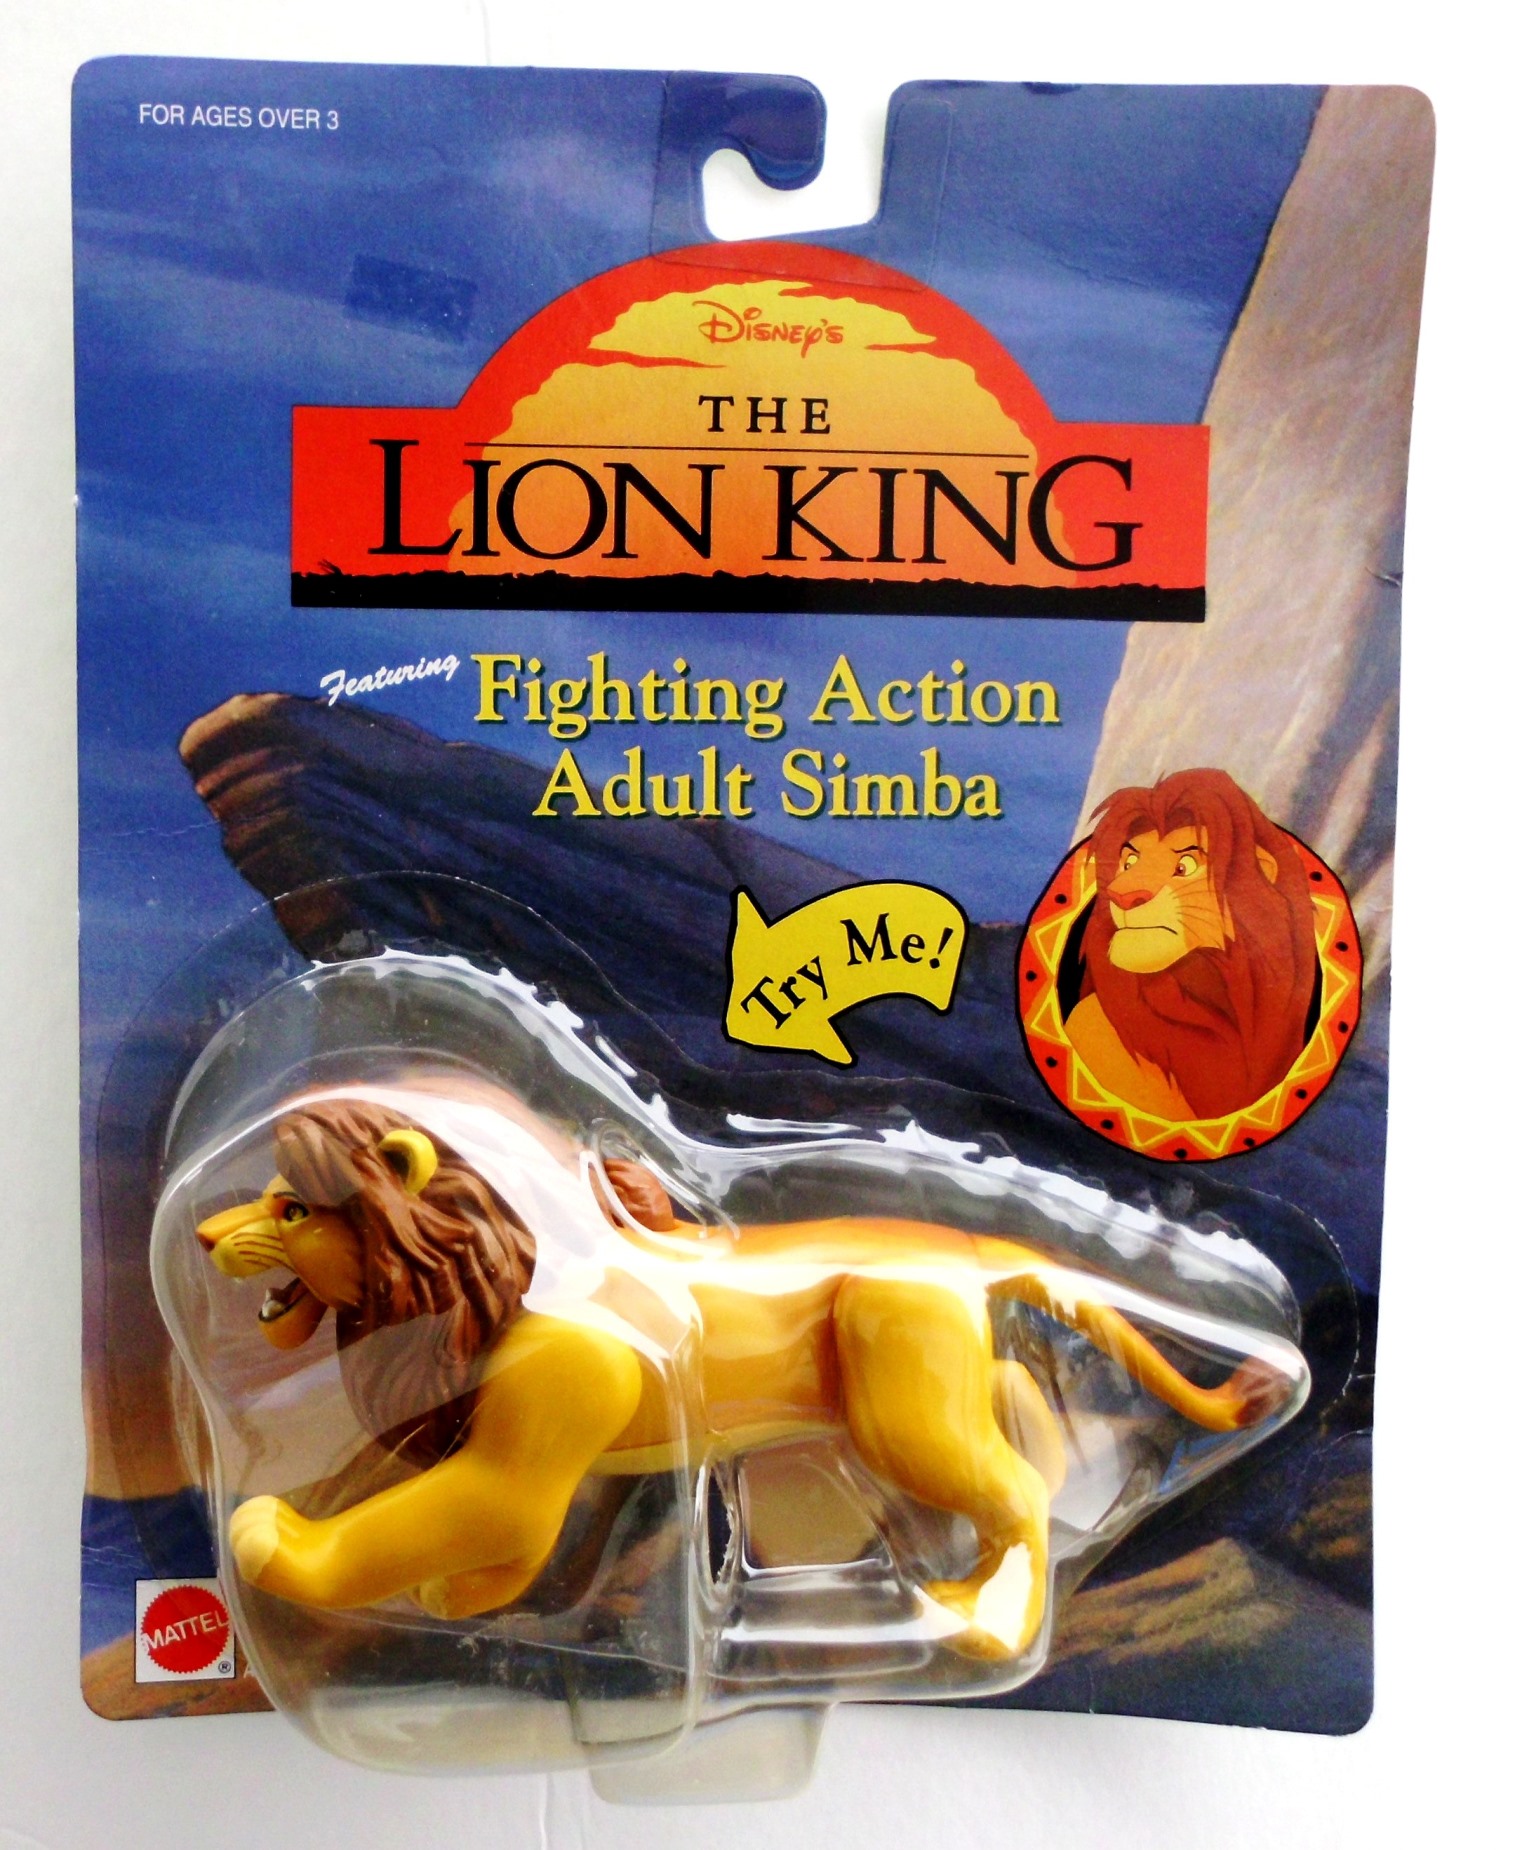 The Lion King 1994 (“Fighting Action Adult Simba”) “Disney's Feature ...